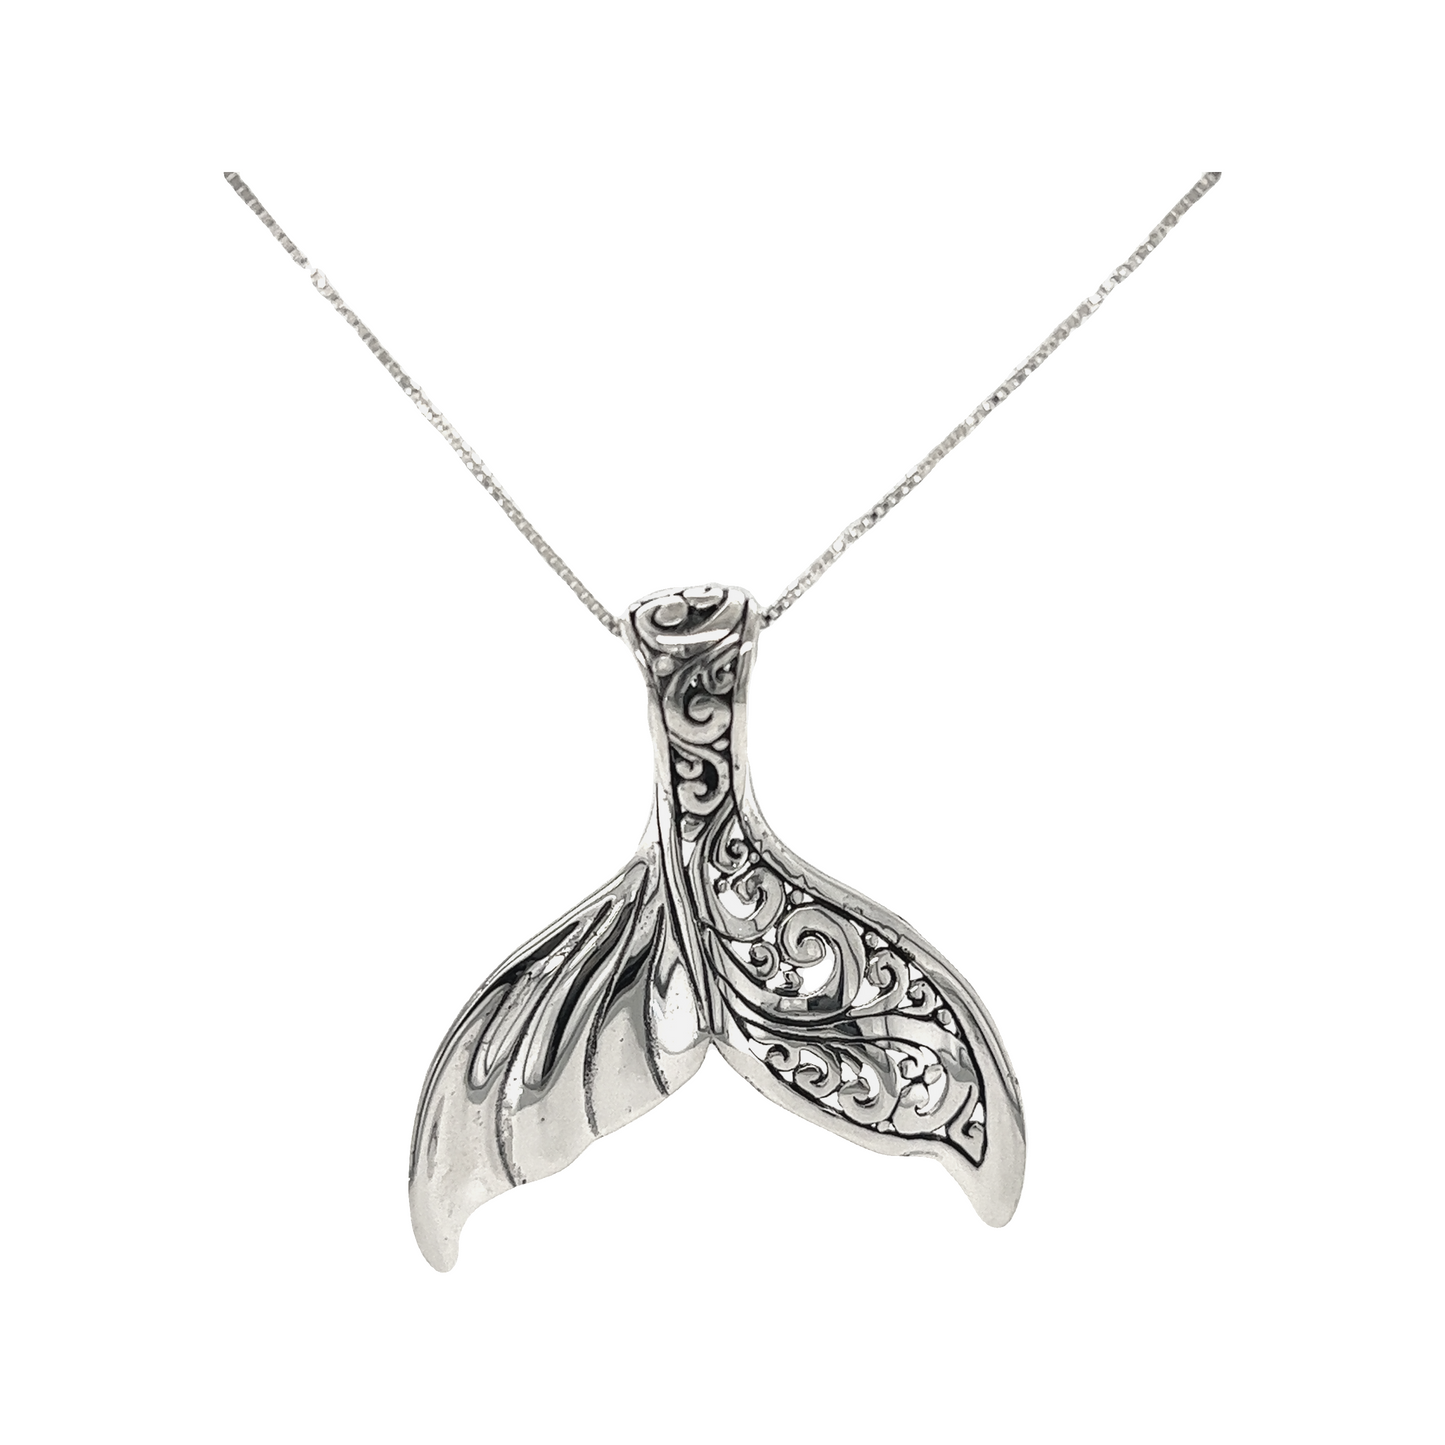 An Exceptional Half Filigree Whale Tail Pendant, perfect for ocean lovers in Santa Cruz. [Brand Name: Super Silver]